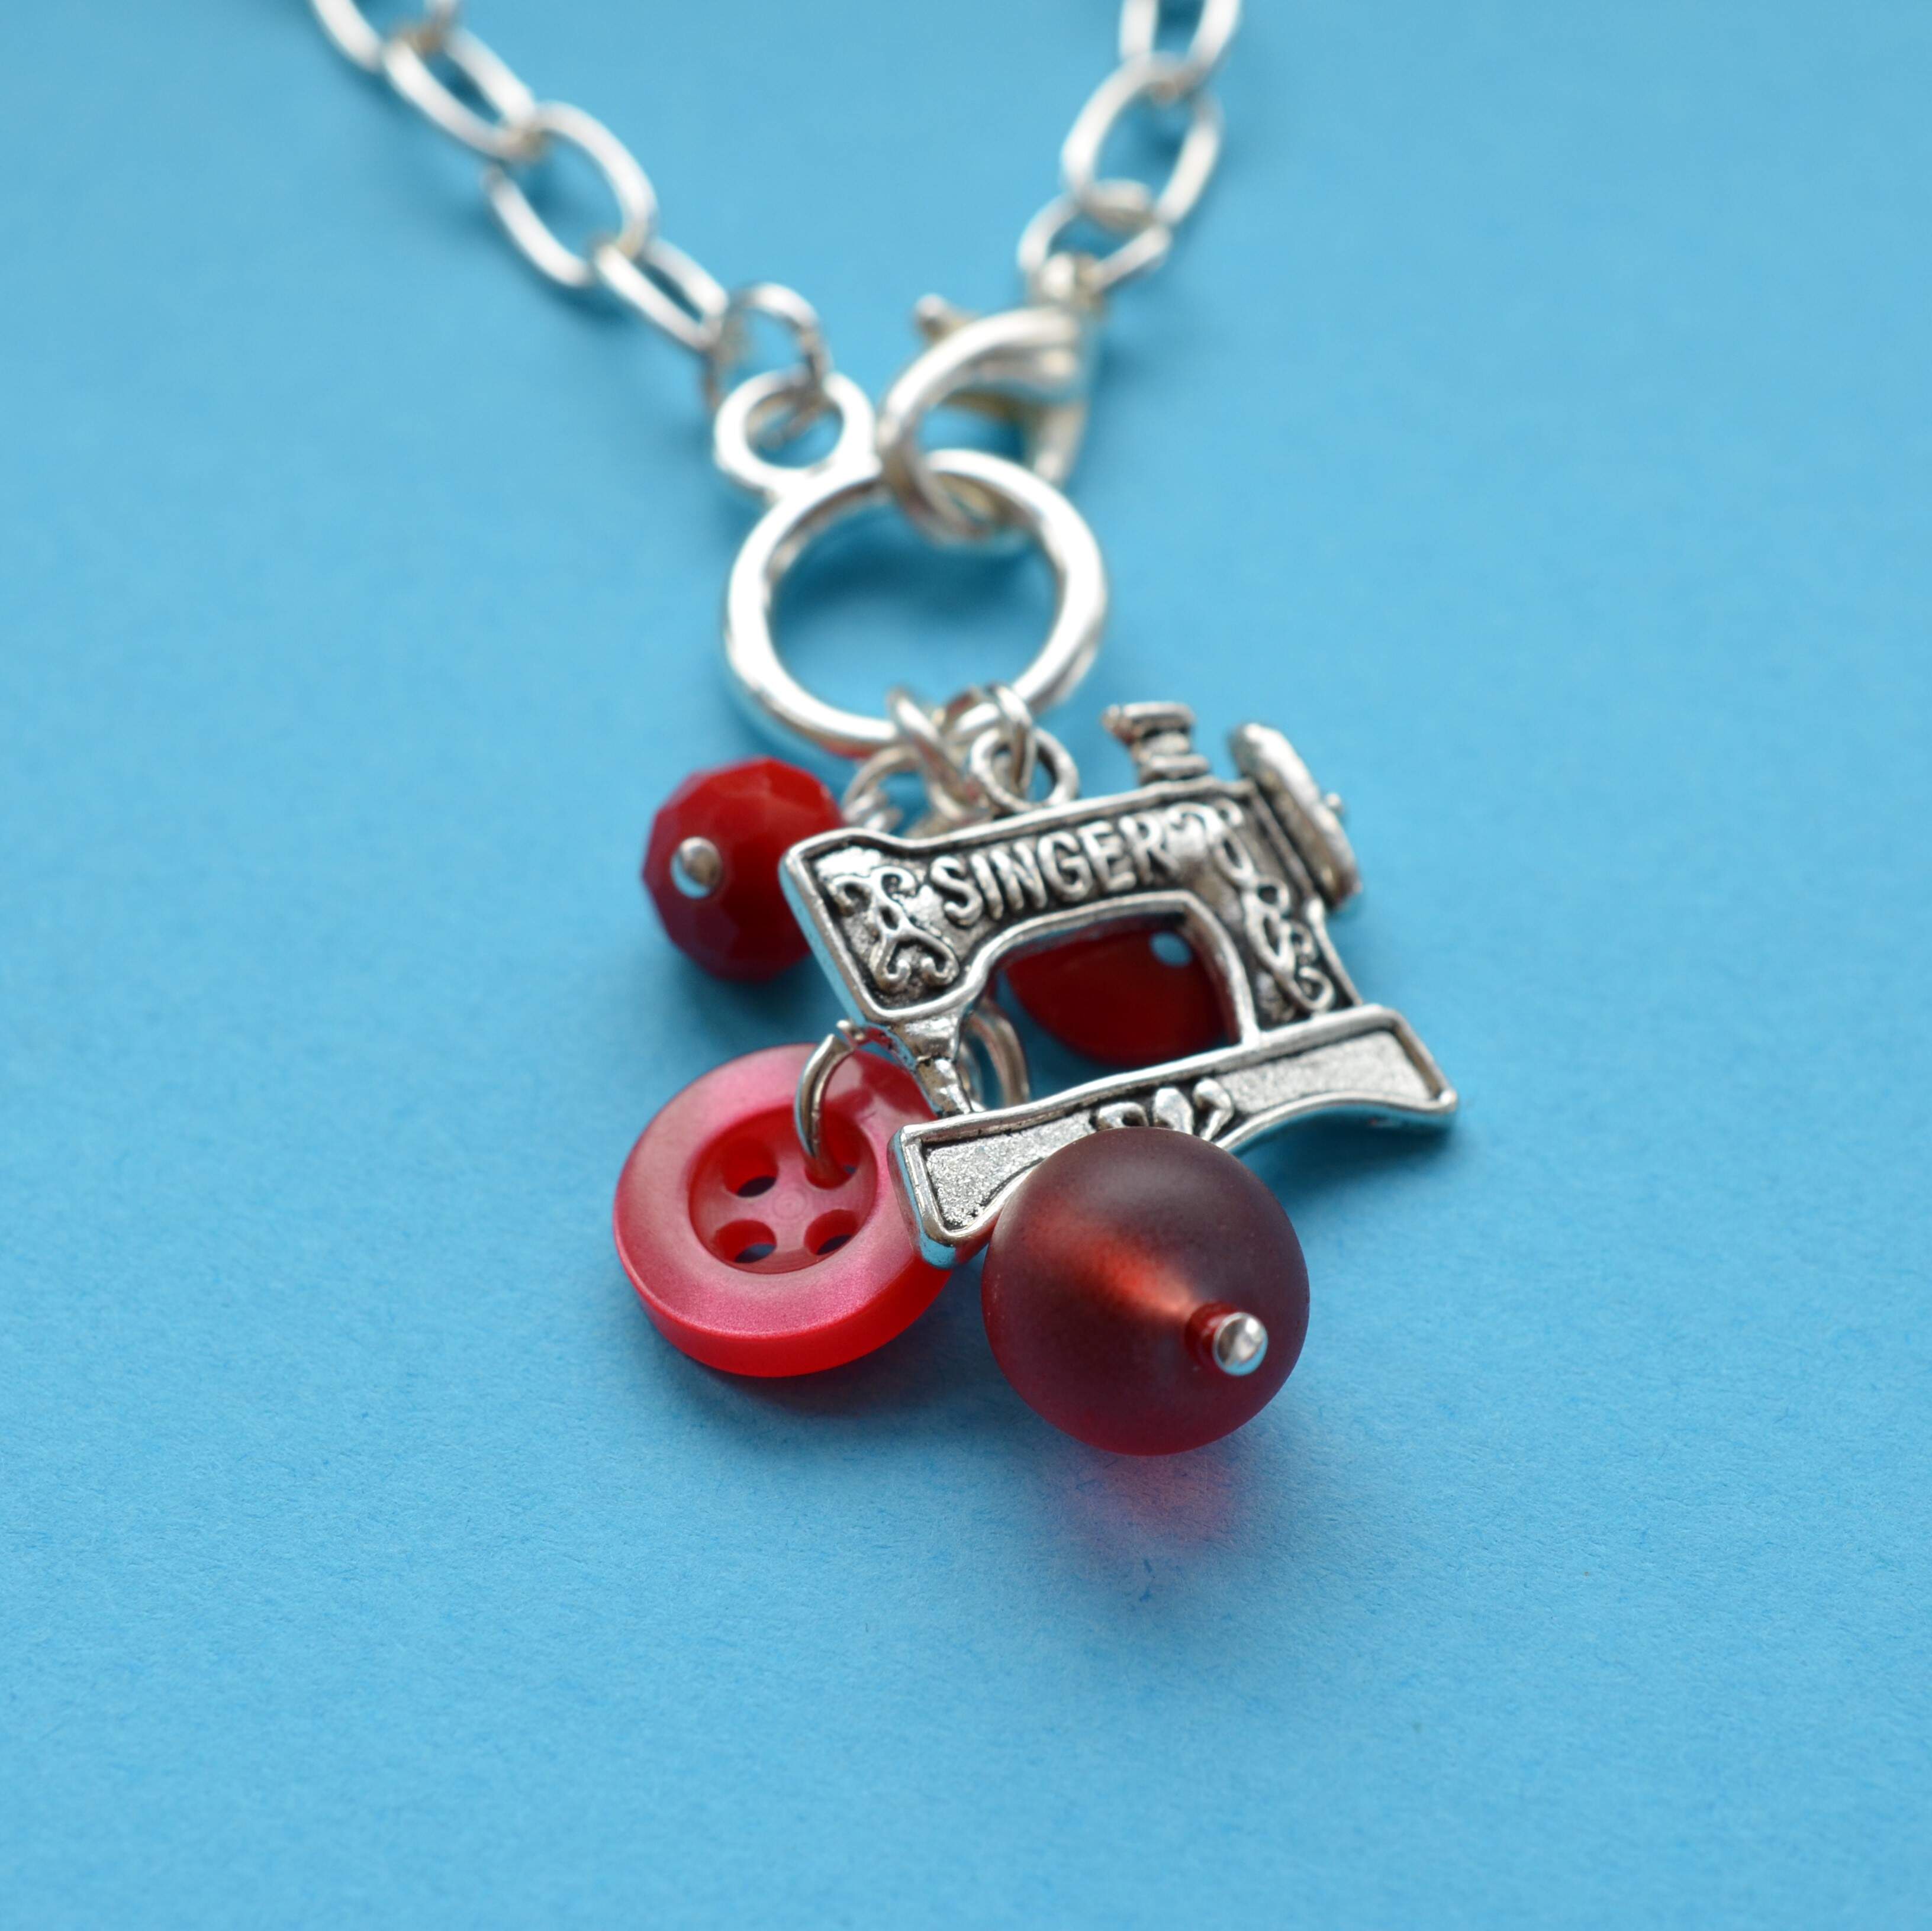 Sewing Machine Cluster Button Charm Bracelet